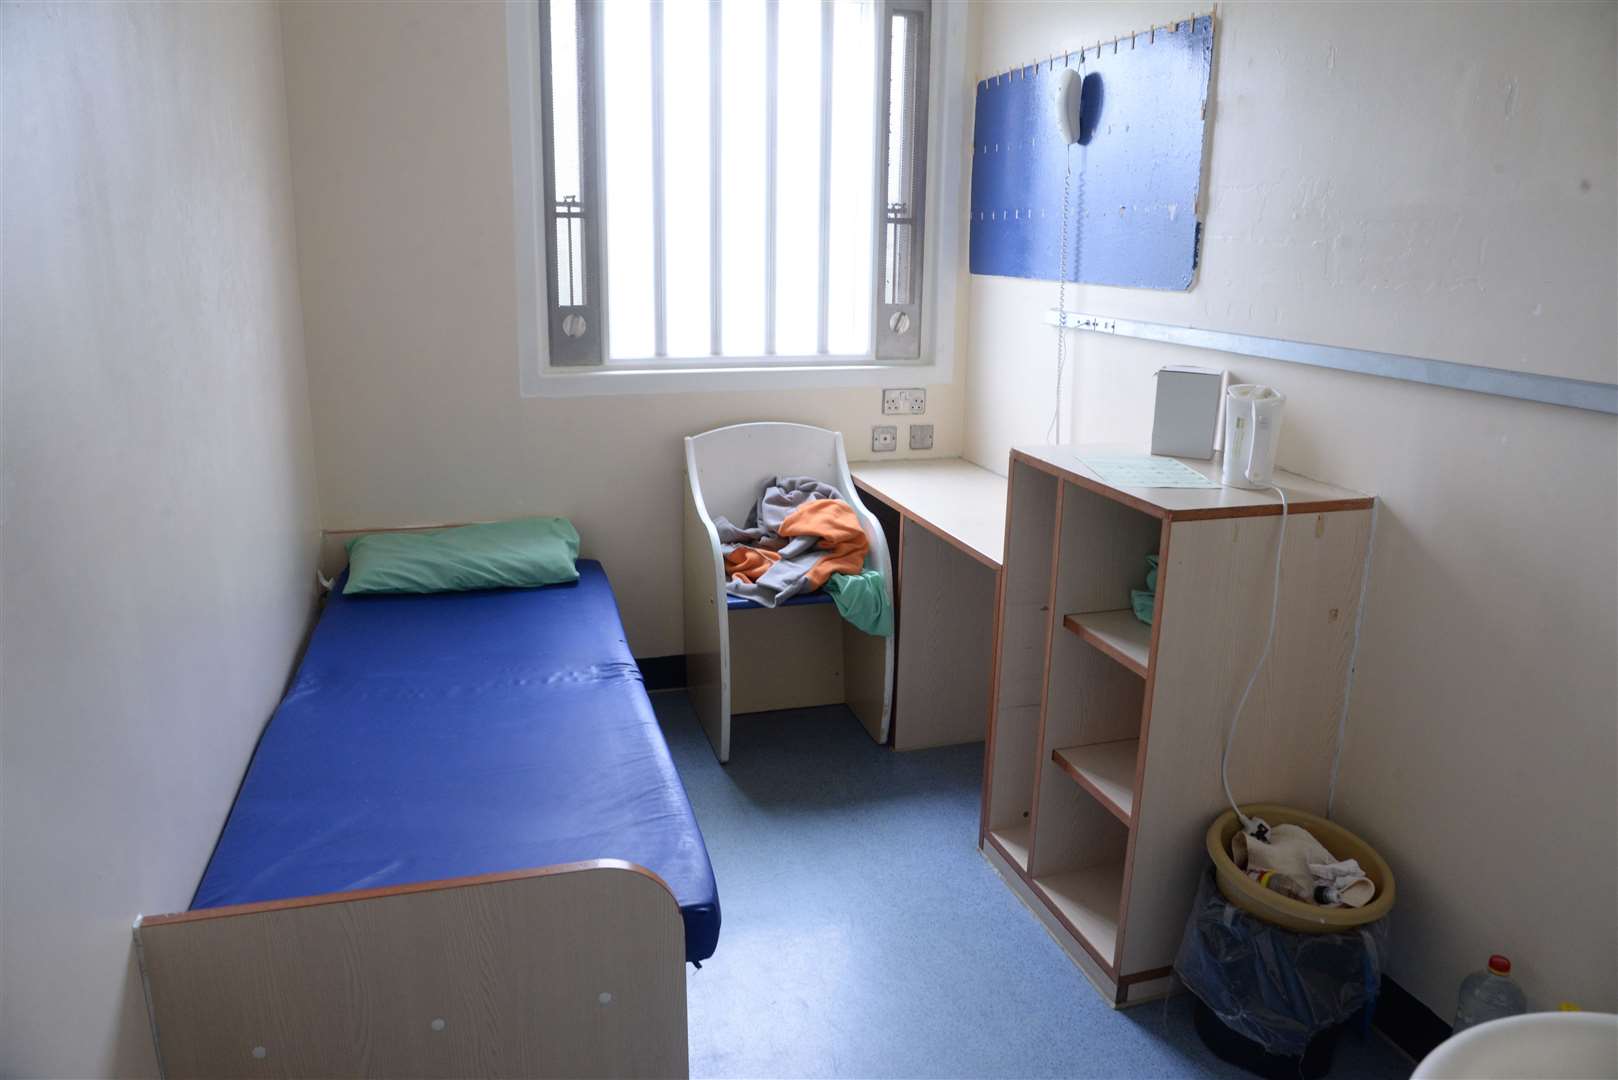 Inside a cell at HMP Swaleside. Picture: Chris Davey